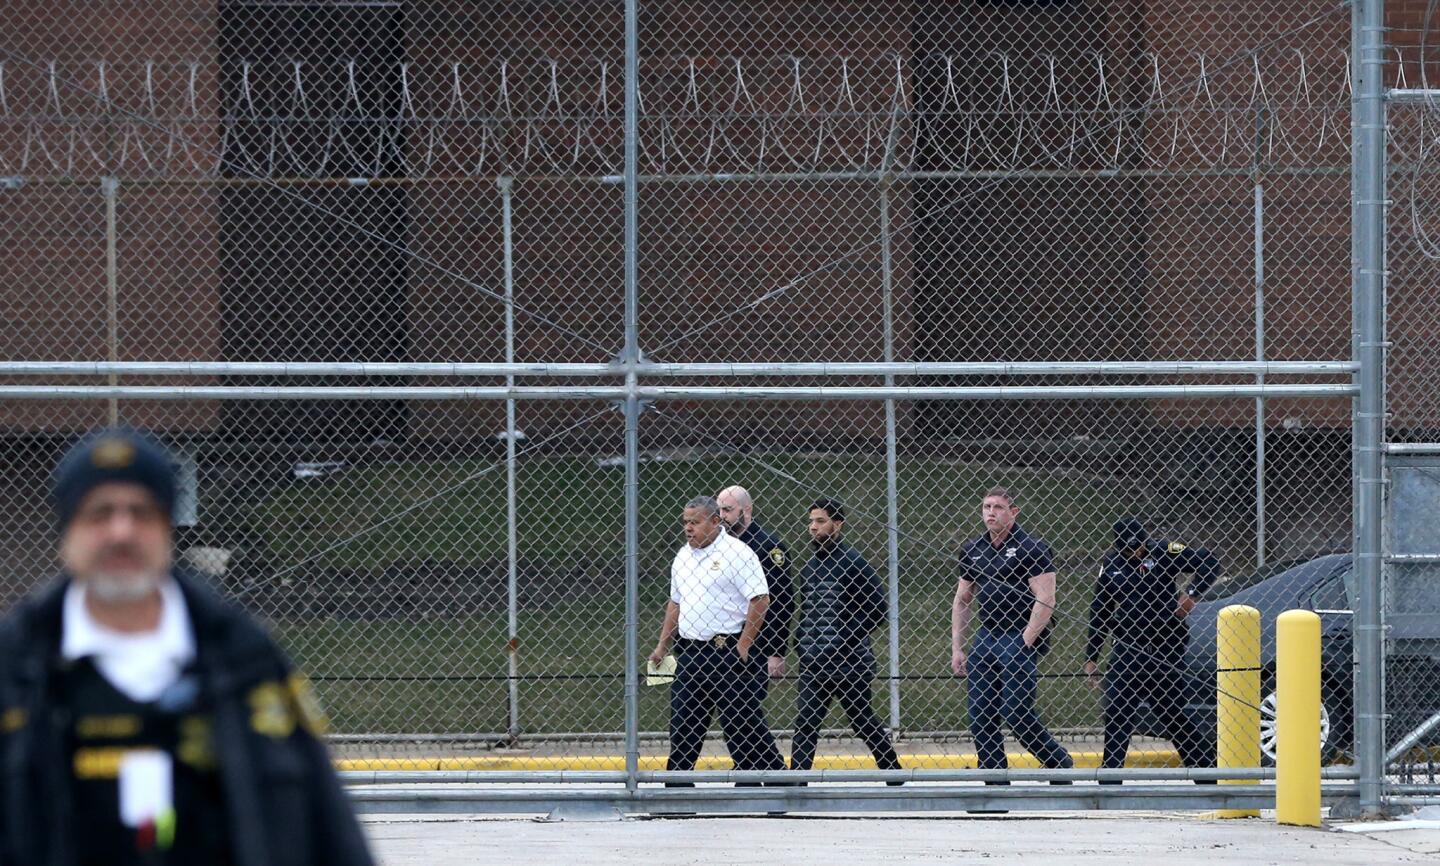 Actor Jussie Smollett (third from right) leaves the Cook County Jail after posting bond on Feb. 21, 2019.